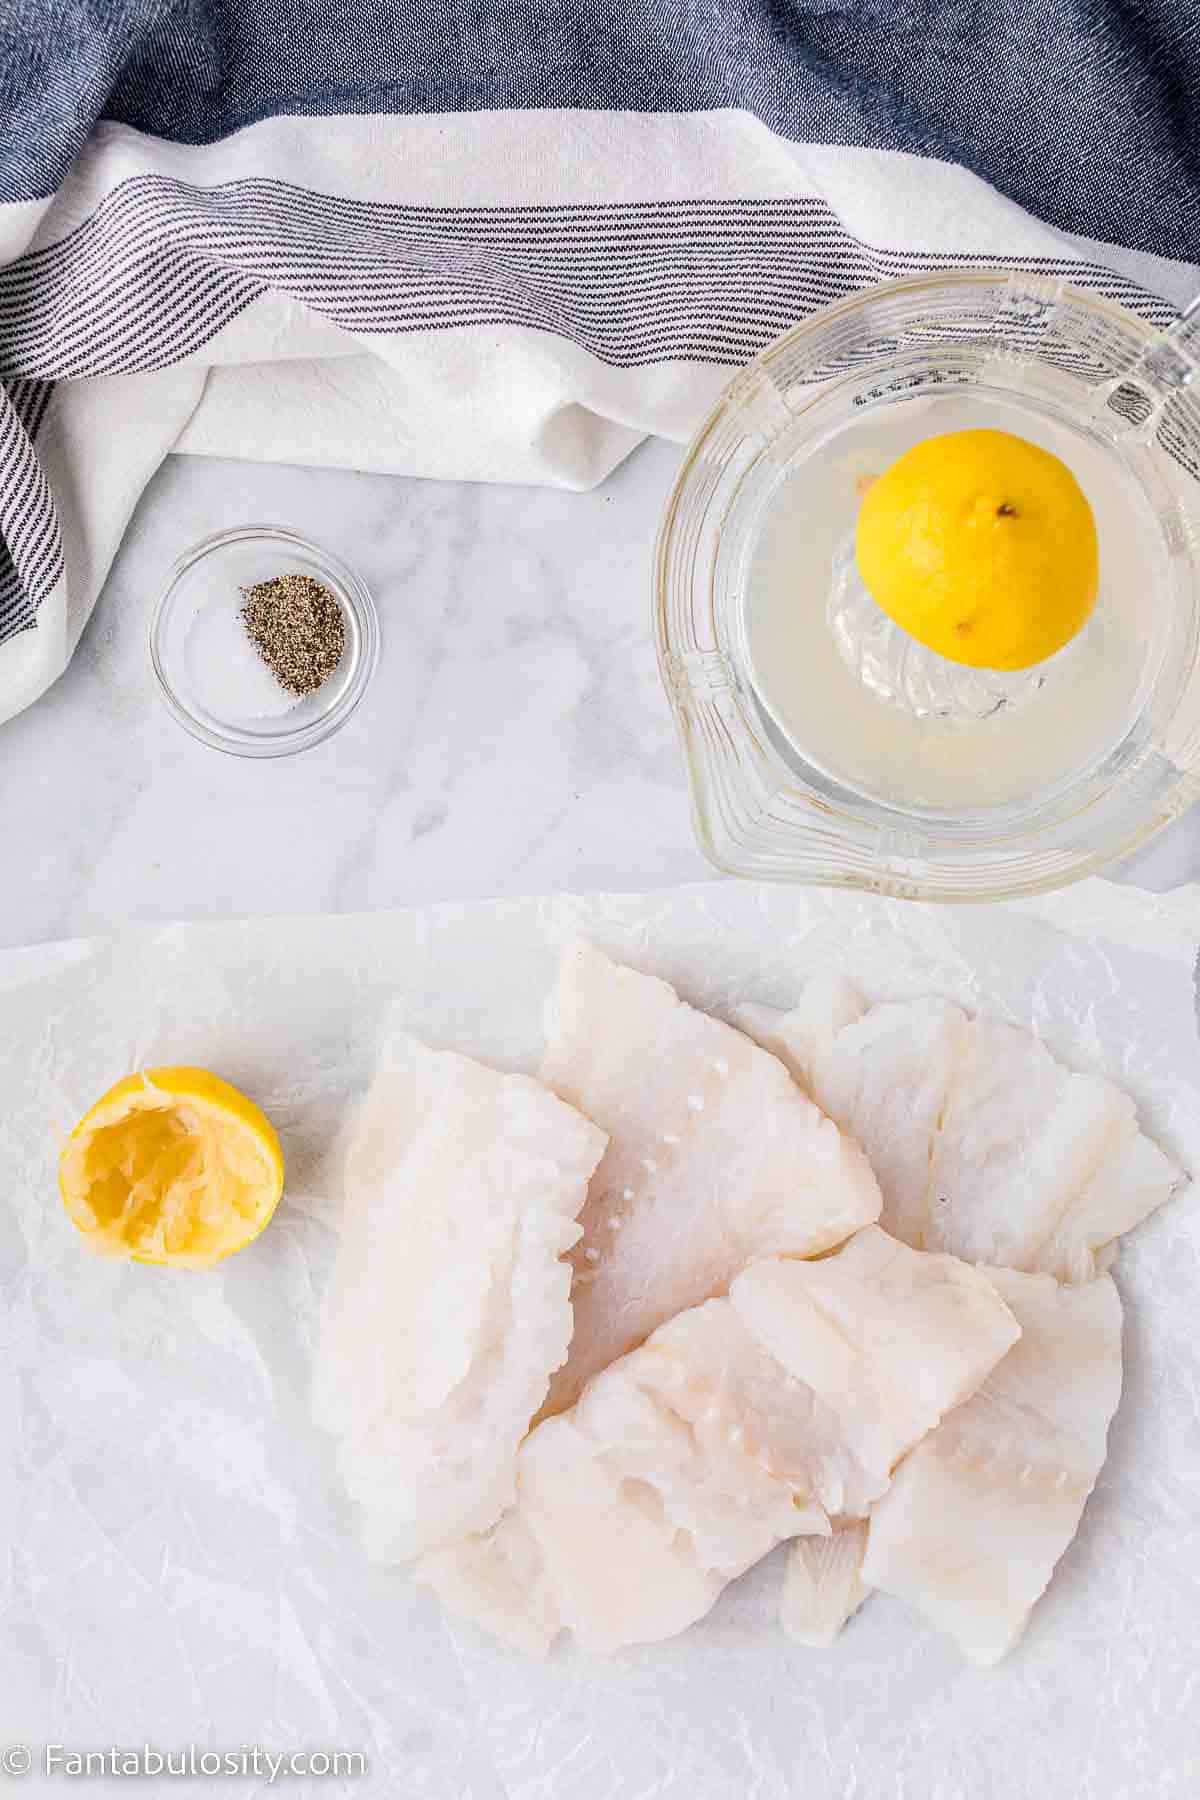 Uncooked cod filets sitting on cloth, next to lemon.